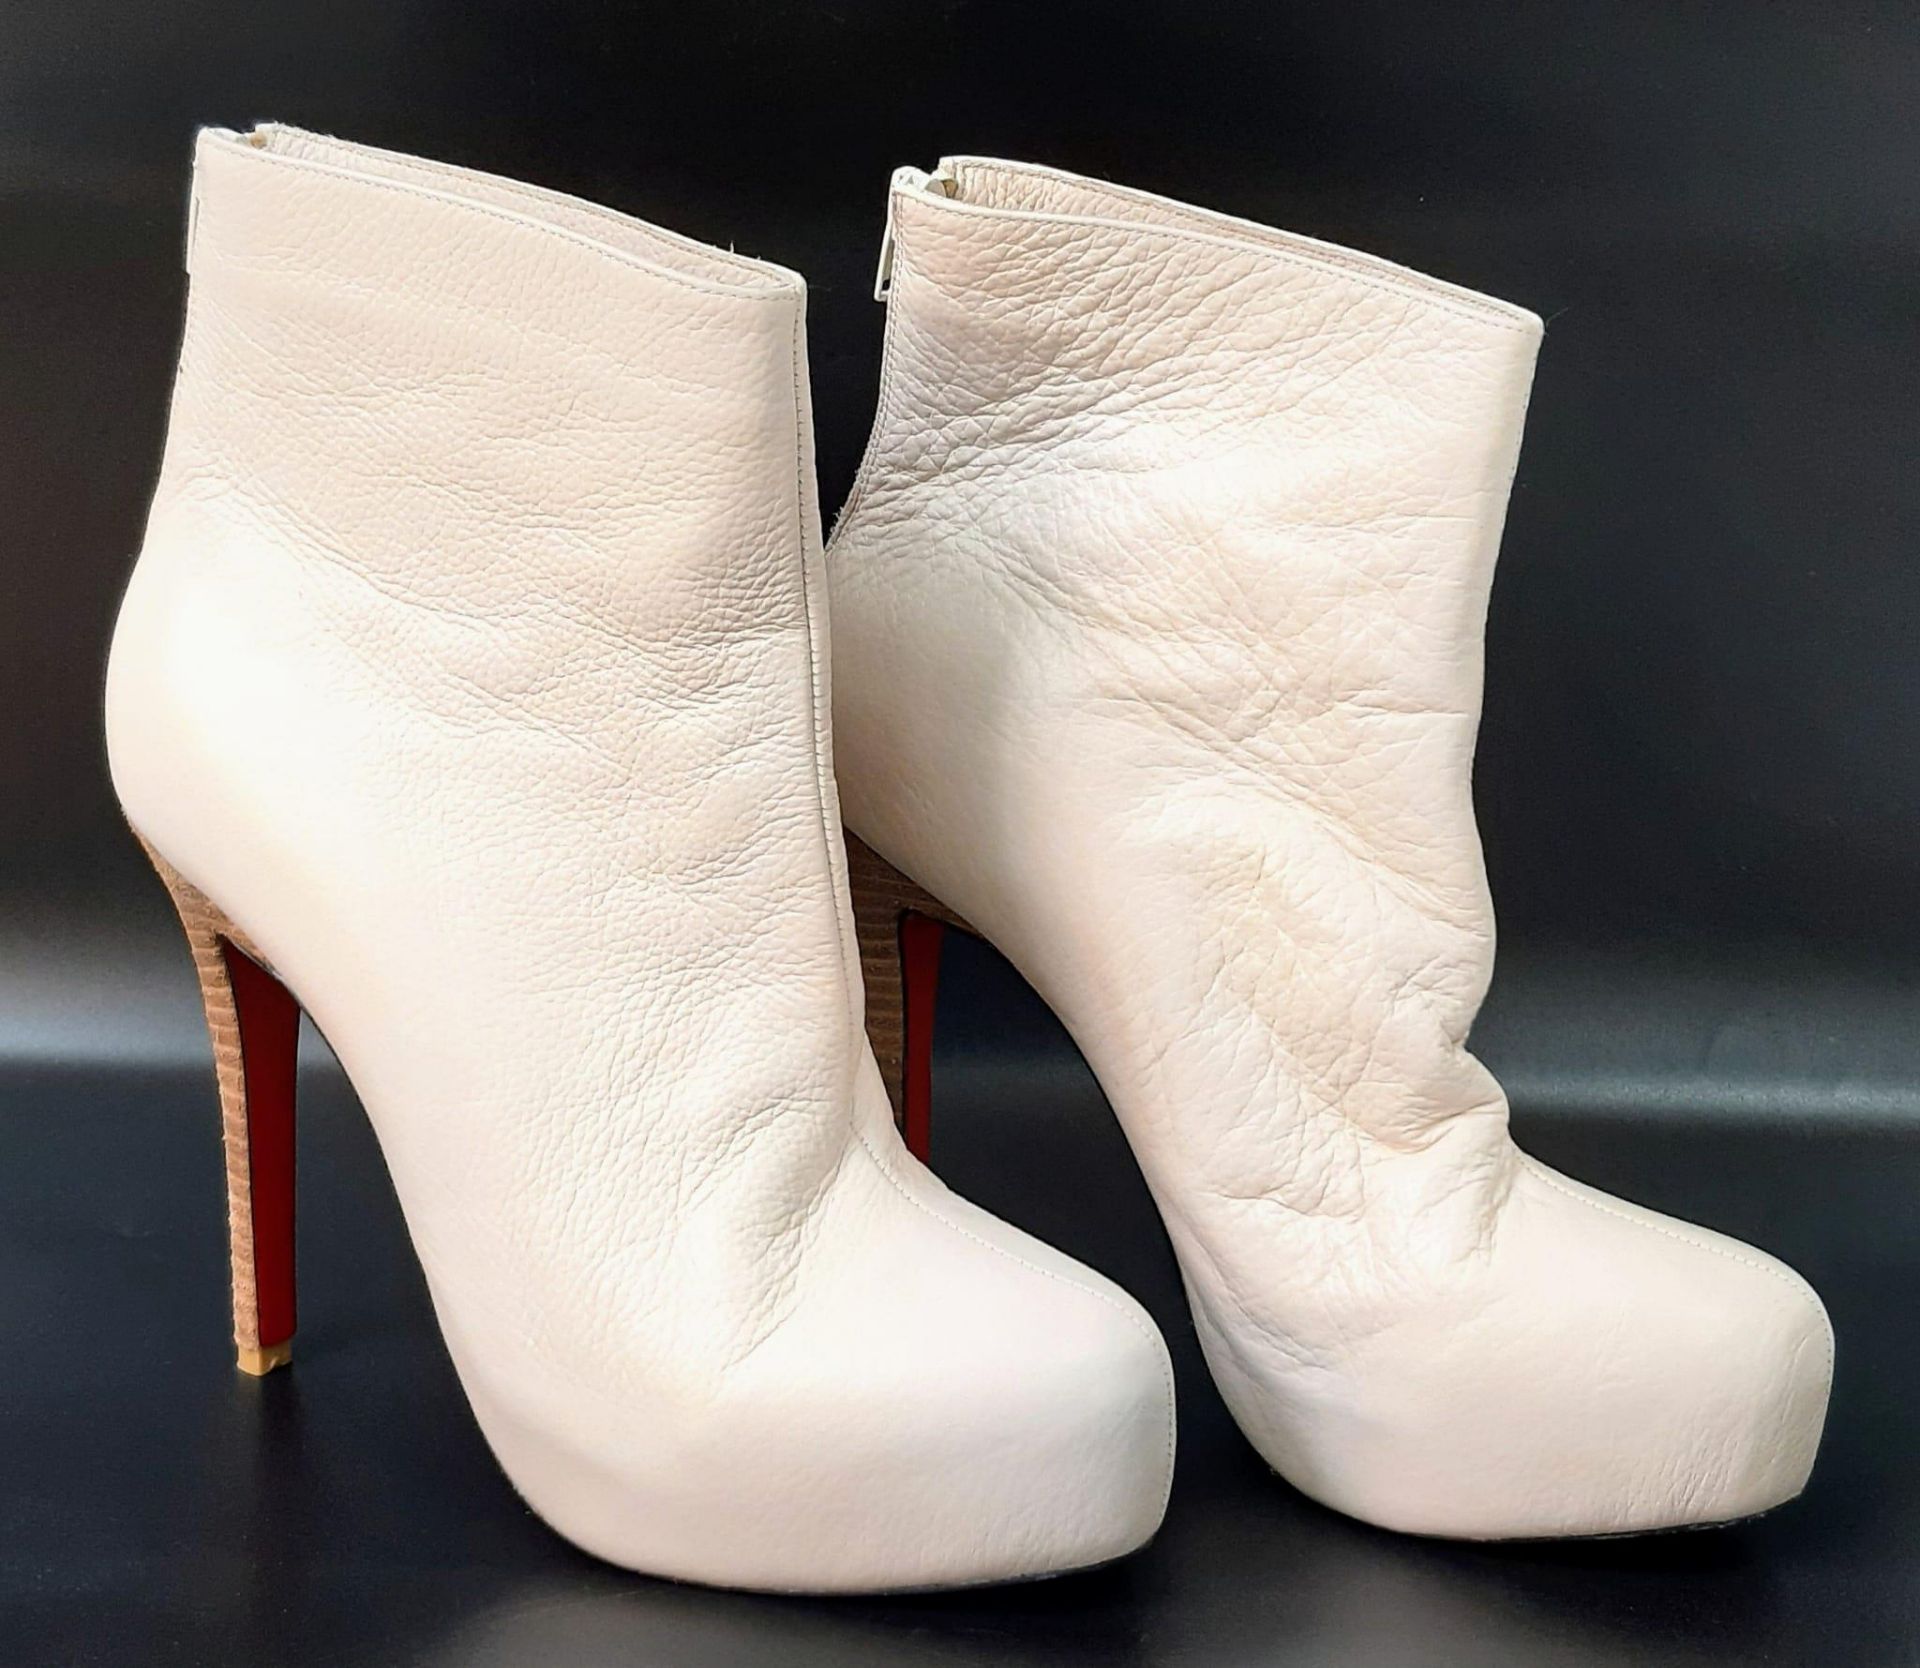 A Pair of Preloved Christian Louboutin Platform Ankle Boots, White leather with Wooden Heel, UK - Image 2 of 8